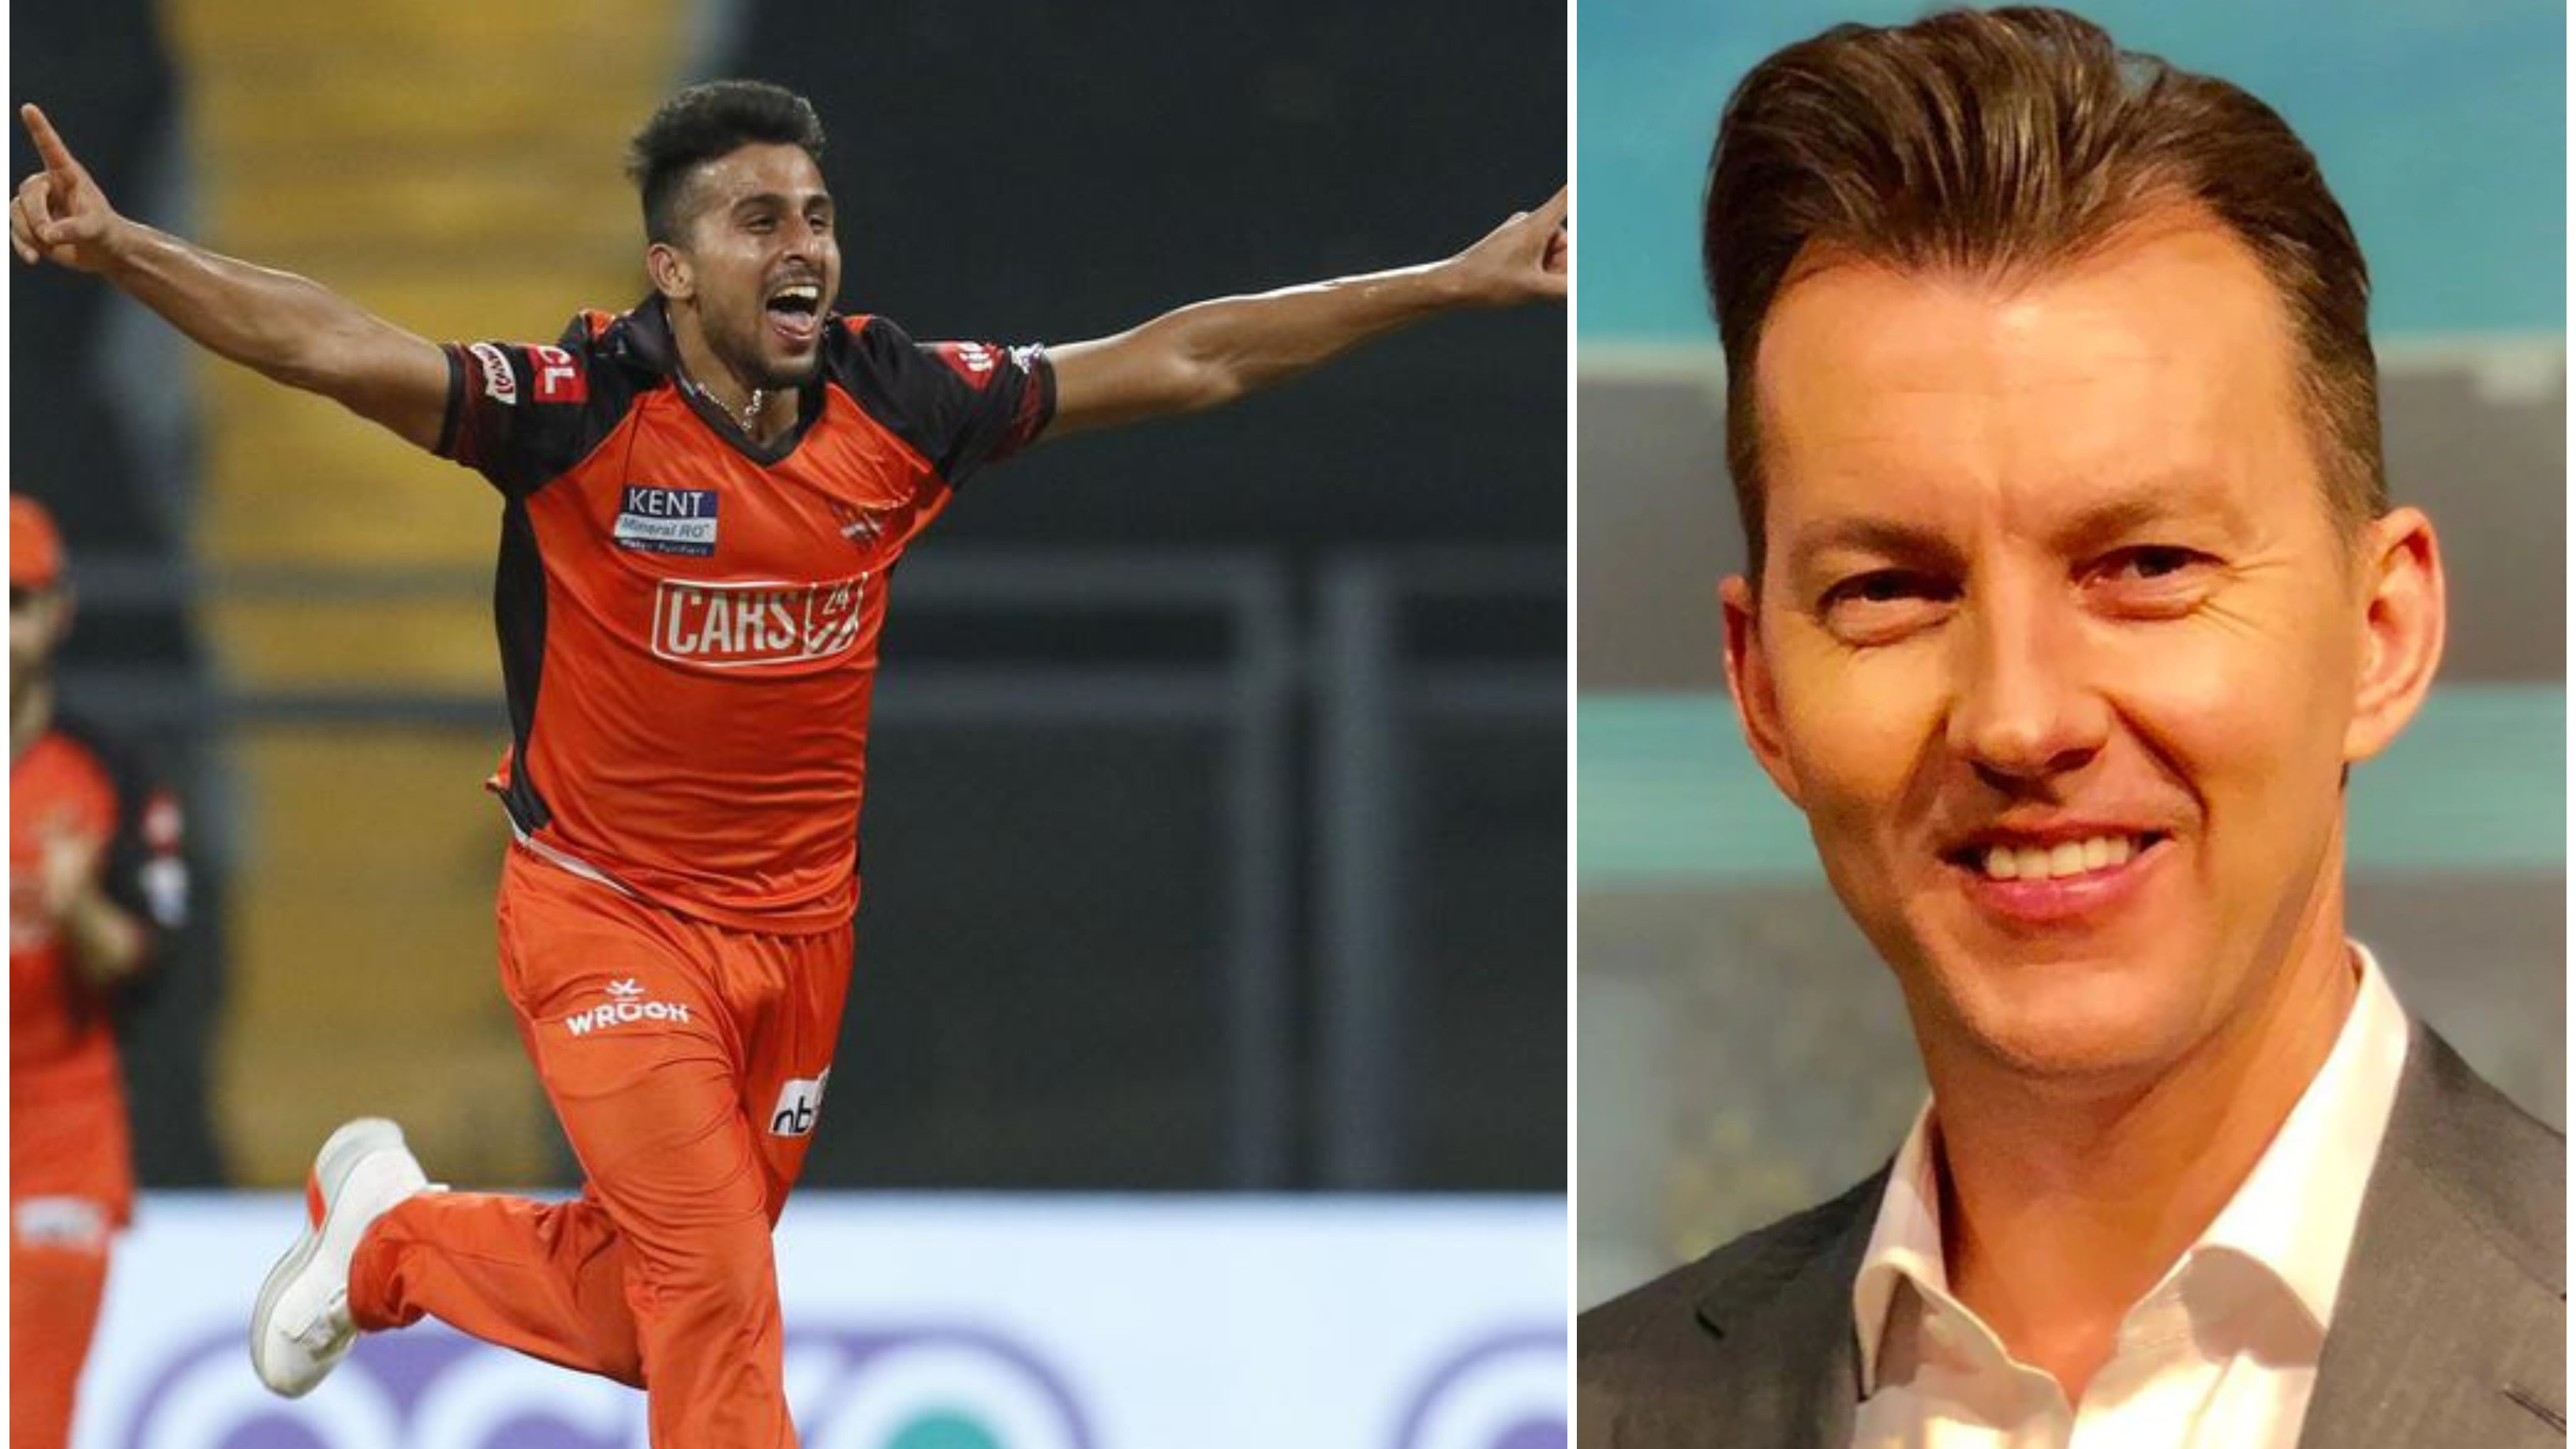 IPL 2022: “He is a great find”, Brett Lee feels Umran Malik can bowl quicker by improving his run-up